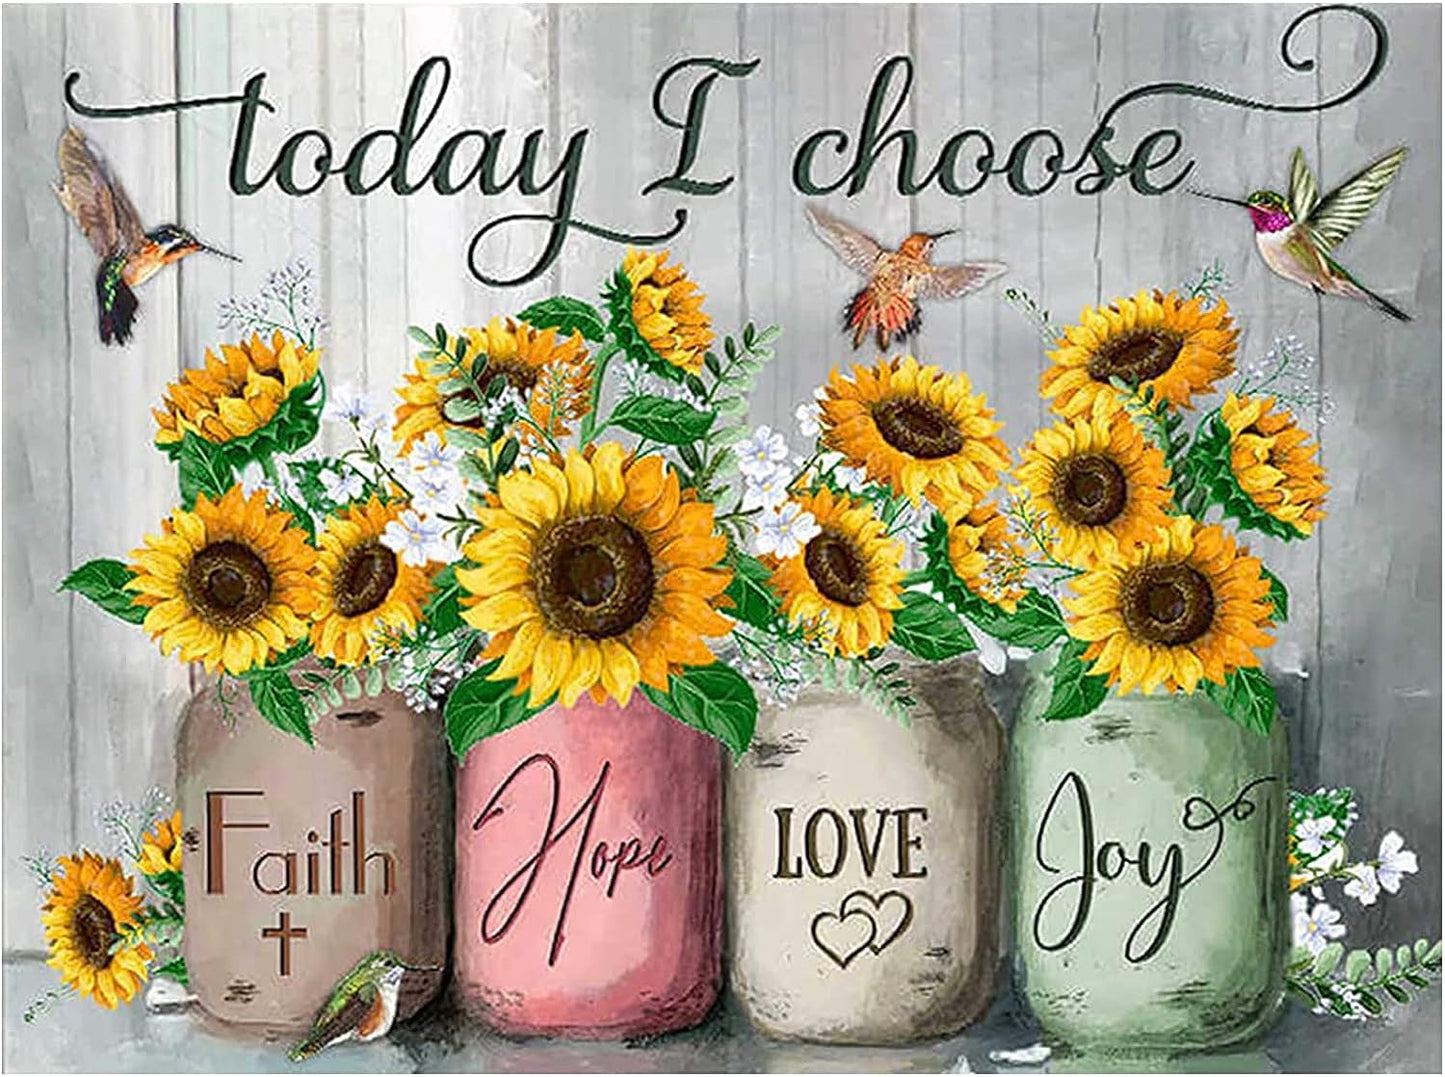 TODAY I CHOOSE